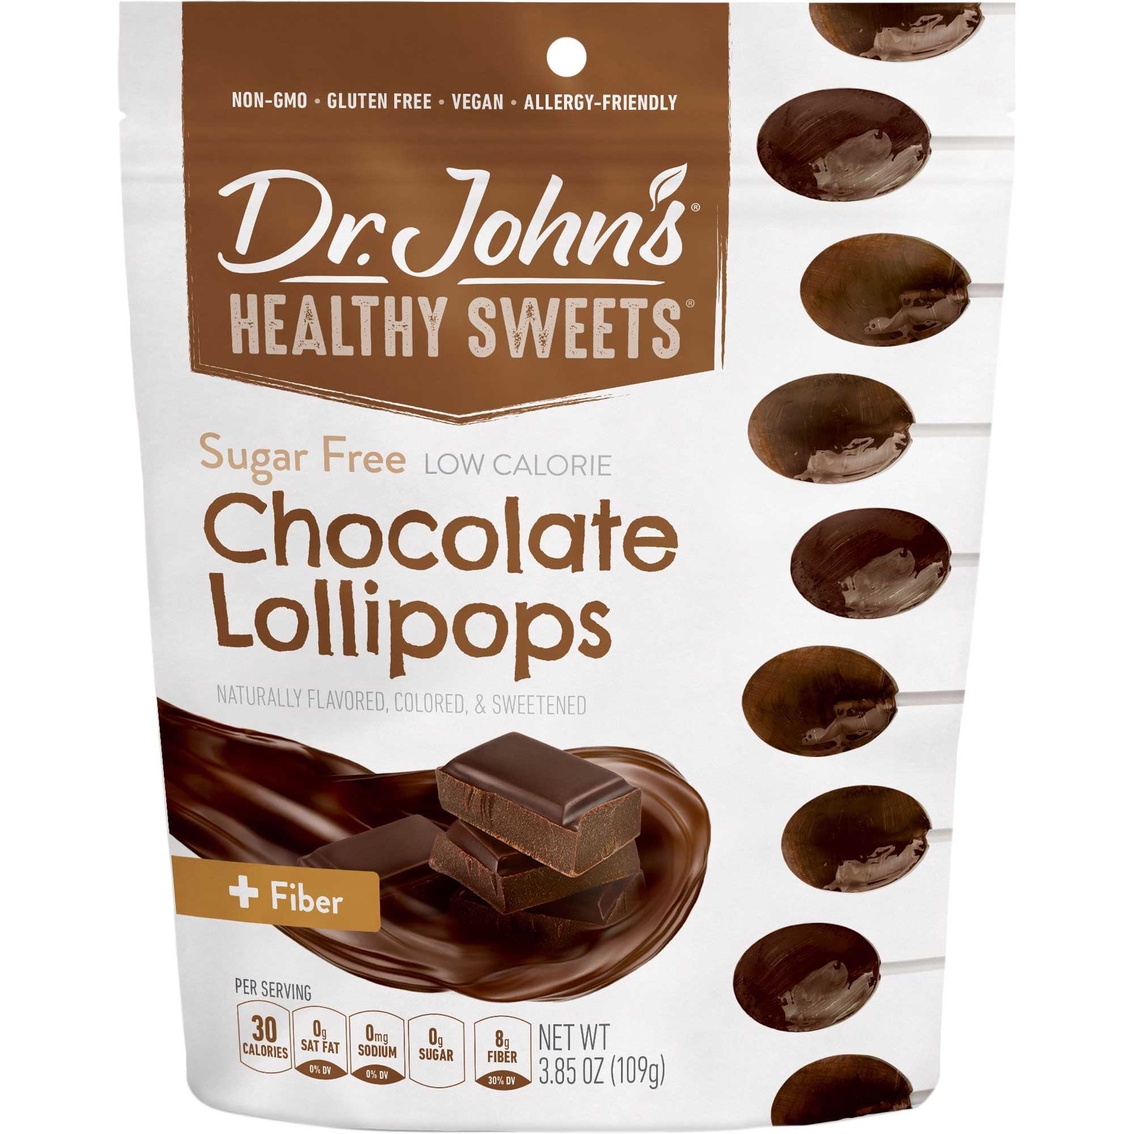 Dr. John's Healthy Sweets Chocolate Lollipops 10 bags